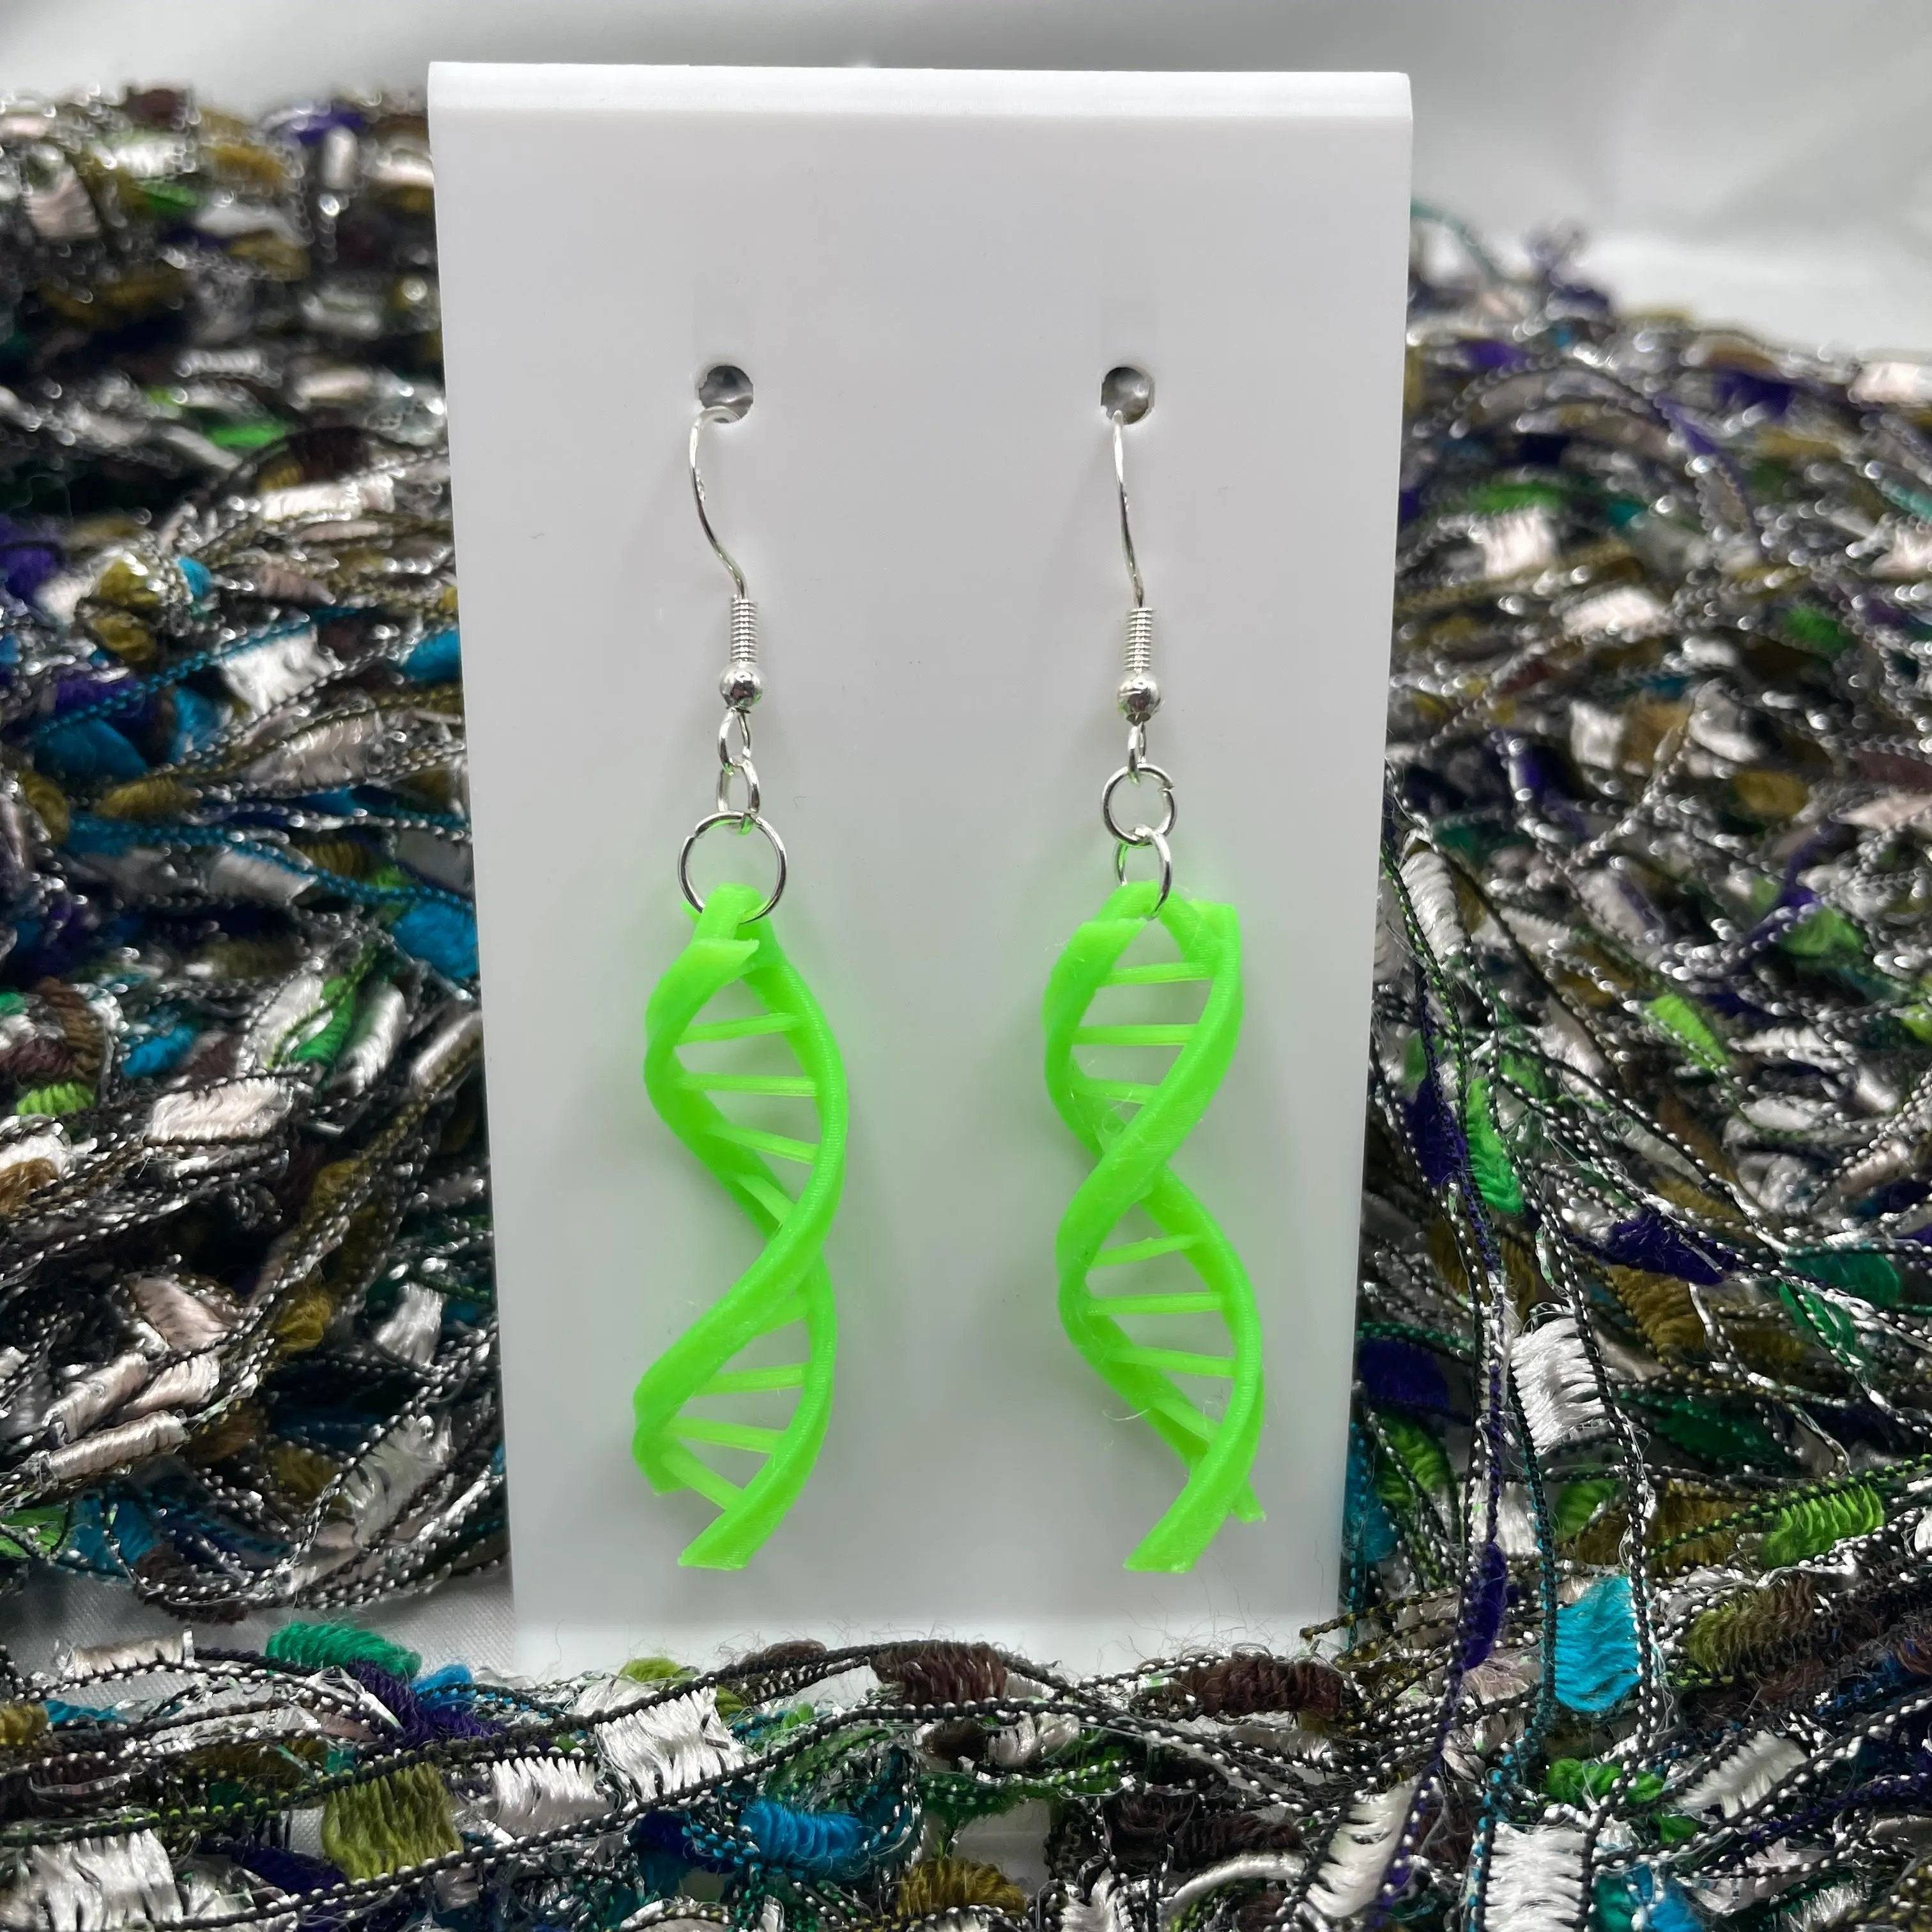 Double Helix DNA Dangle Earrings come in a glow-in-the-dark green color.